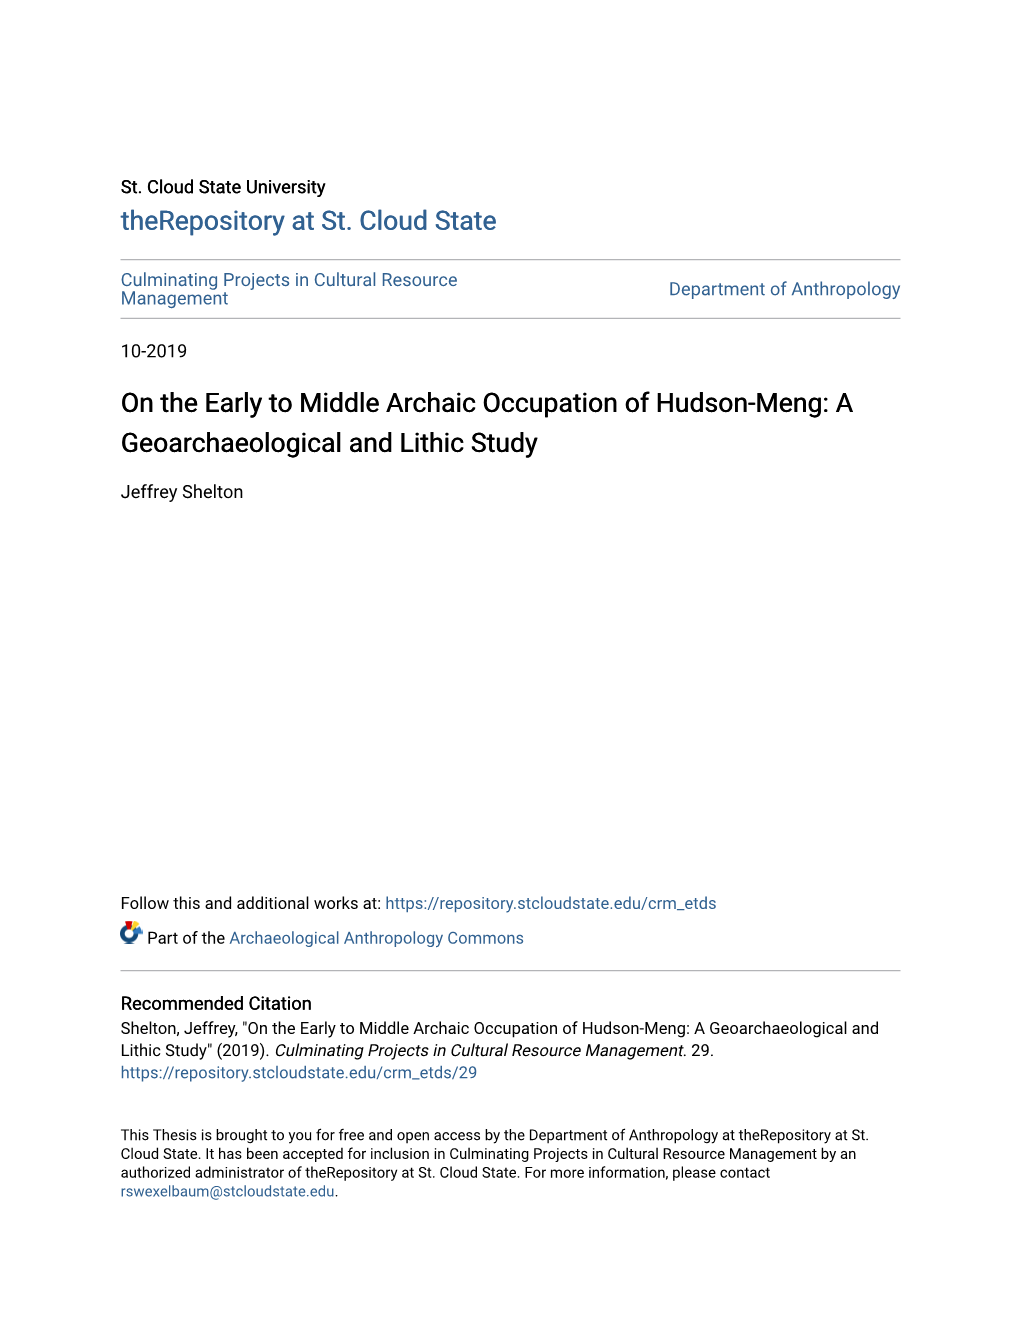 On the Early to Middle Archaic Occupation of Hudson-Meng: a Geoarchaeological and Lithic Study